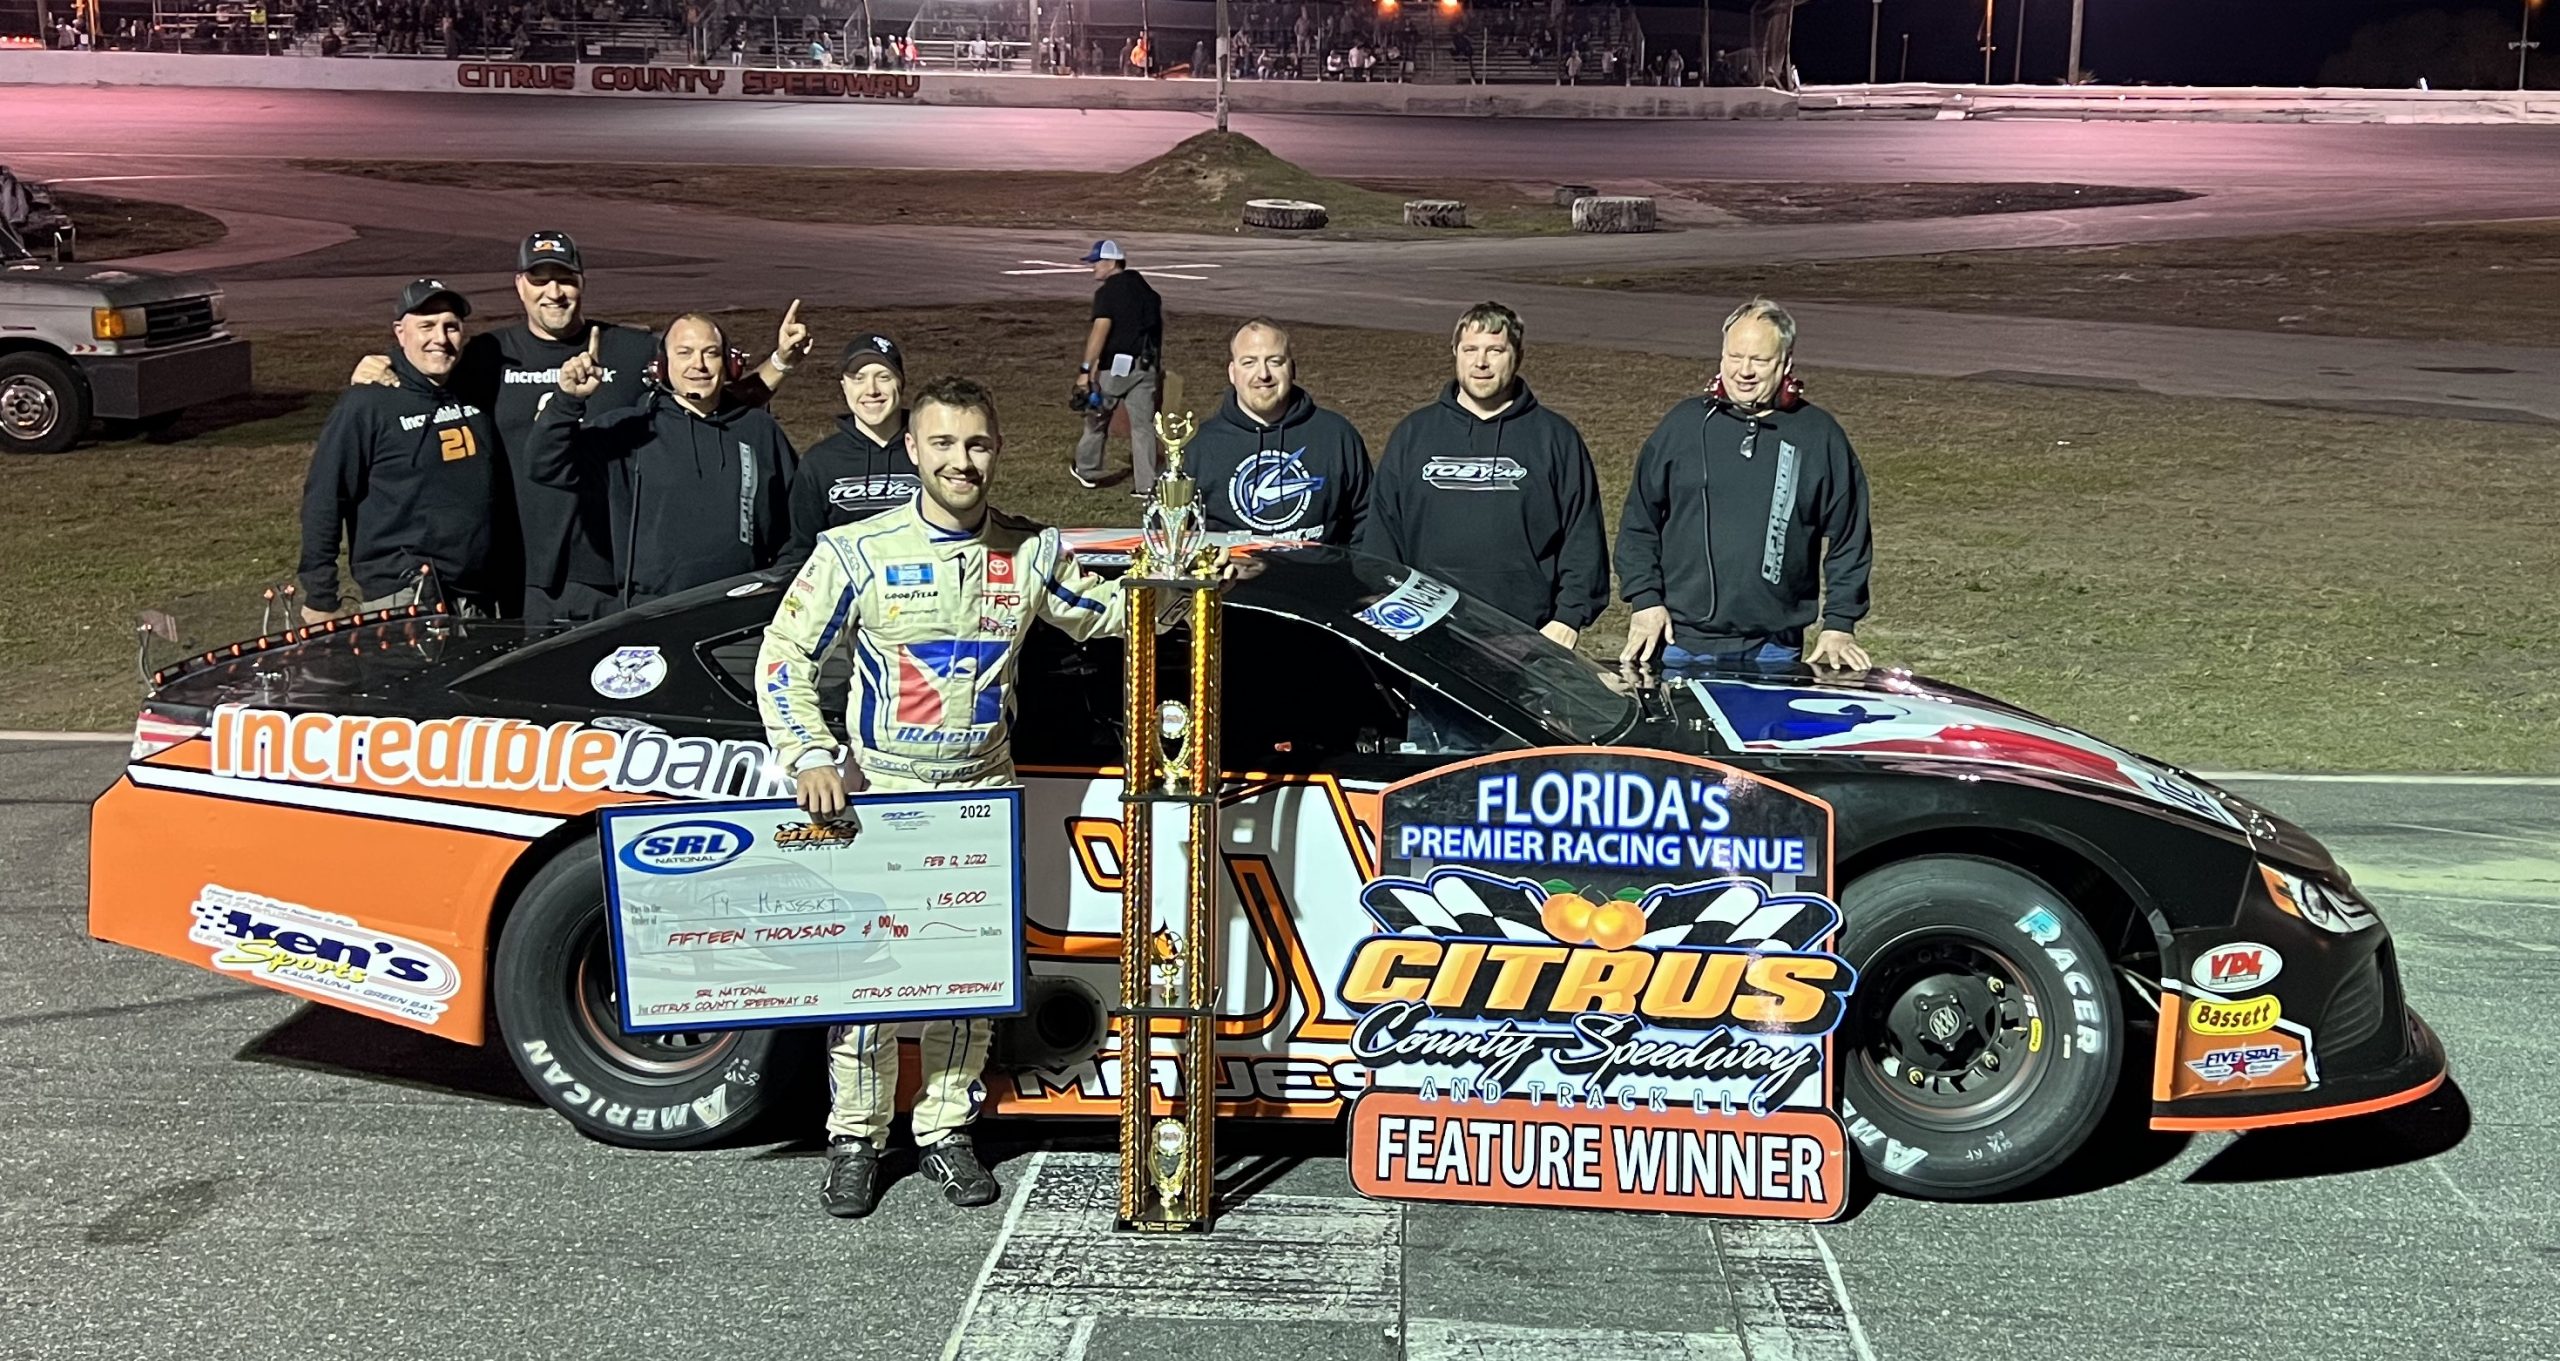 Majeski “Magical” in Debut of SRL National at Citrus County Speedway